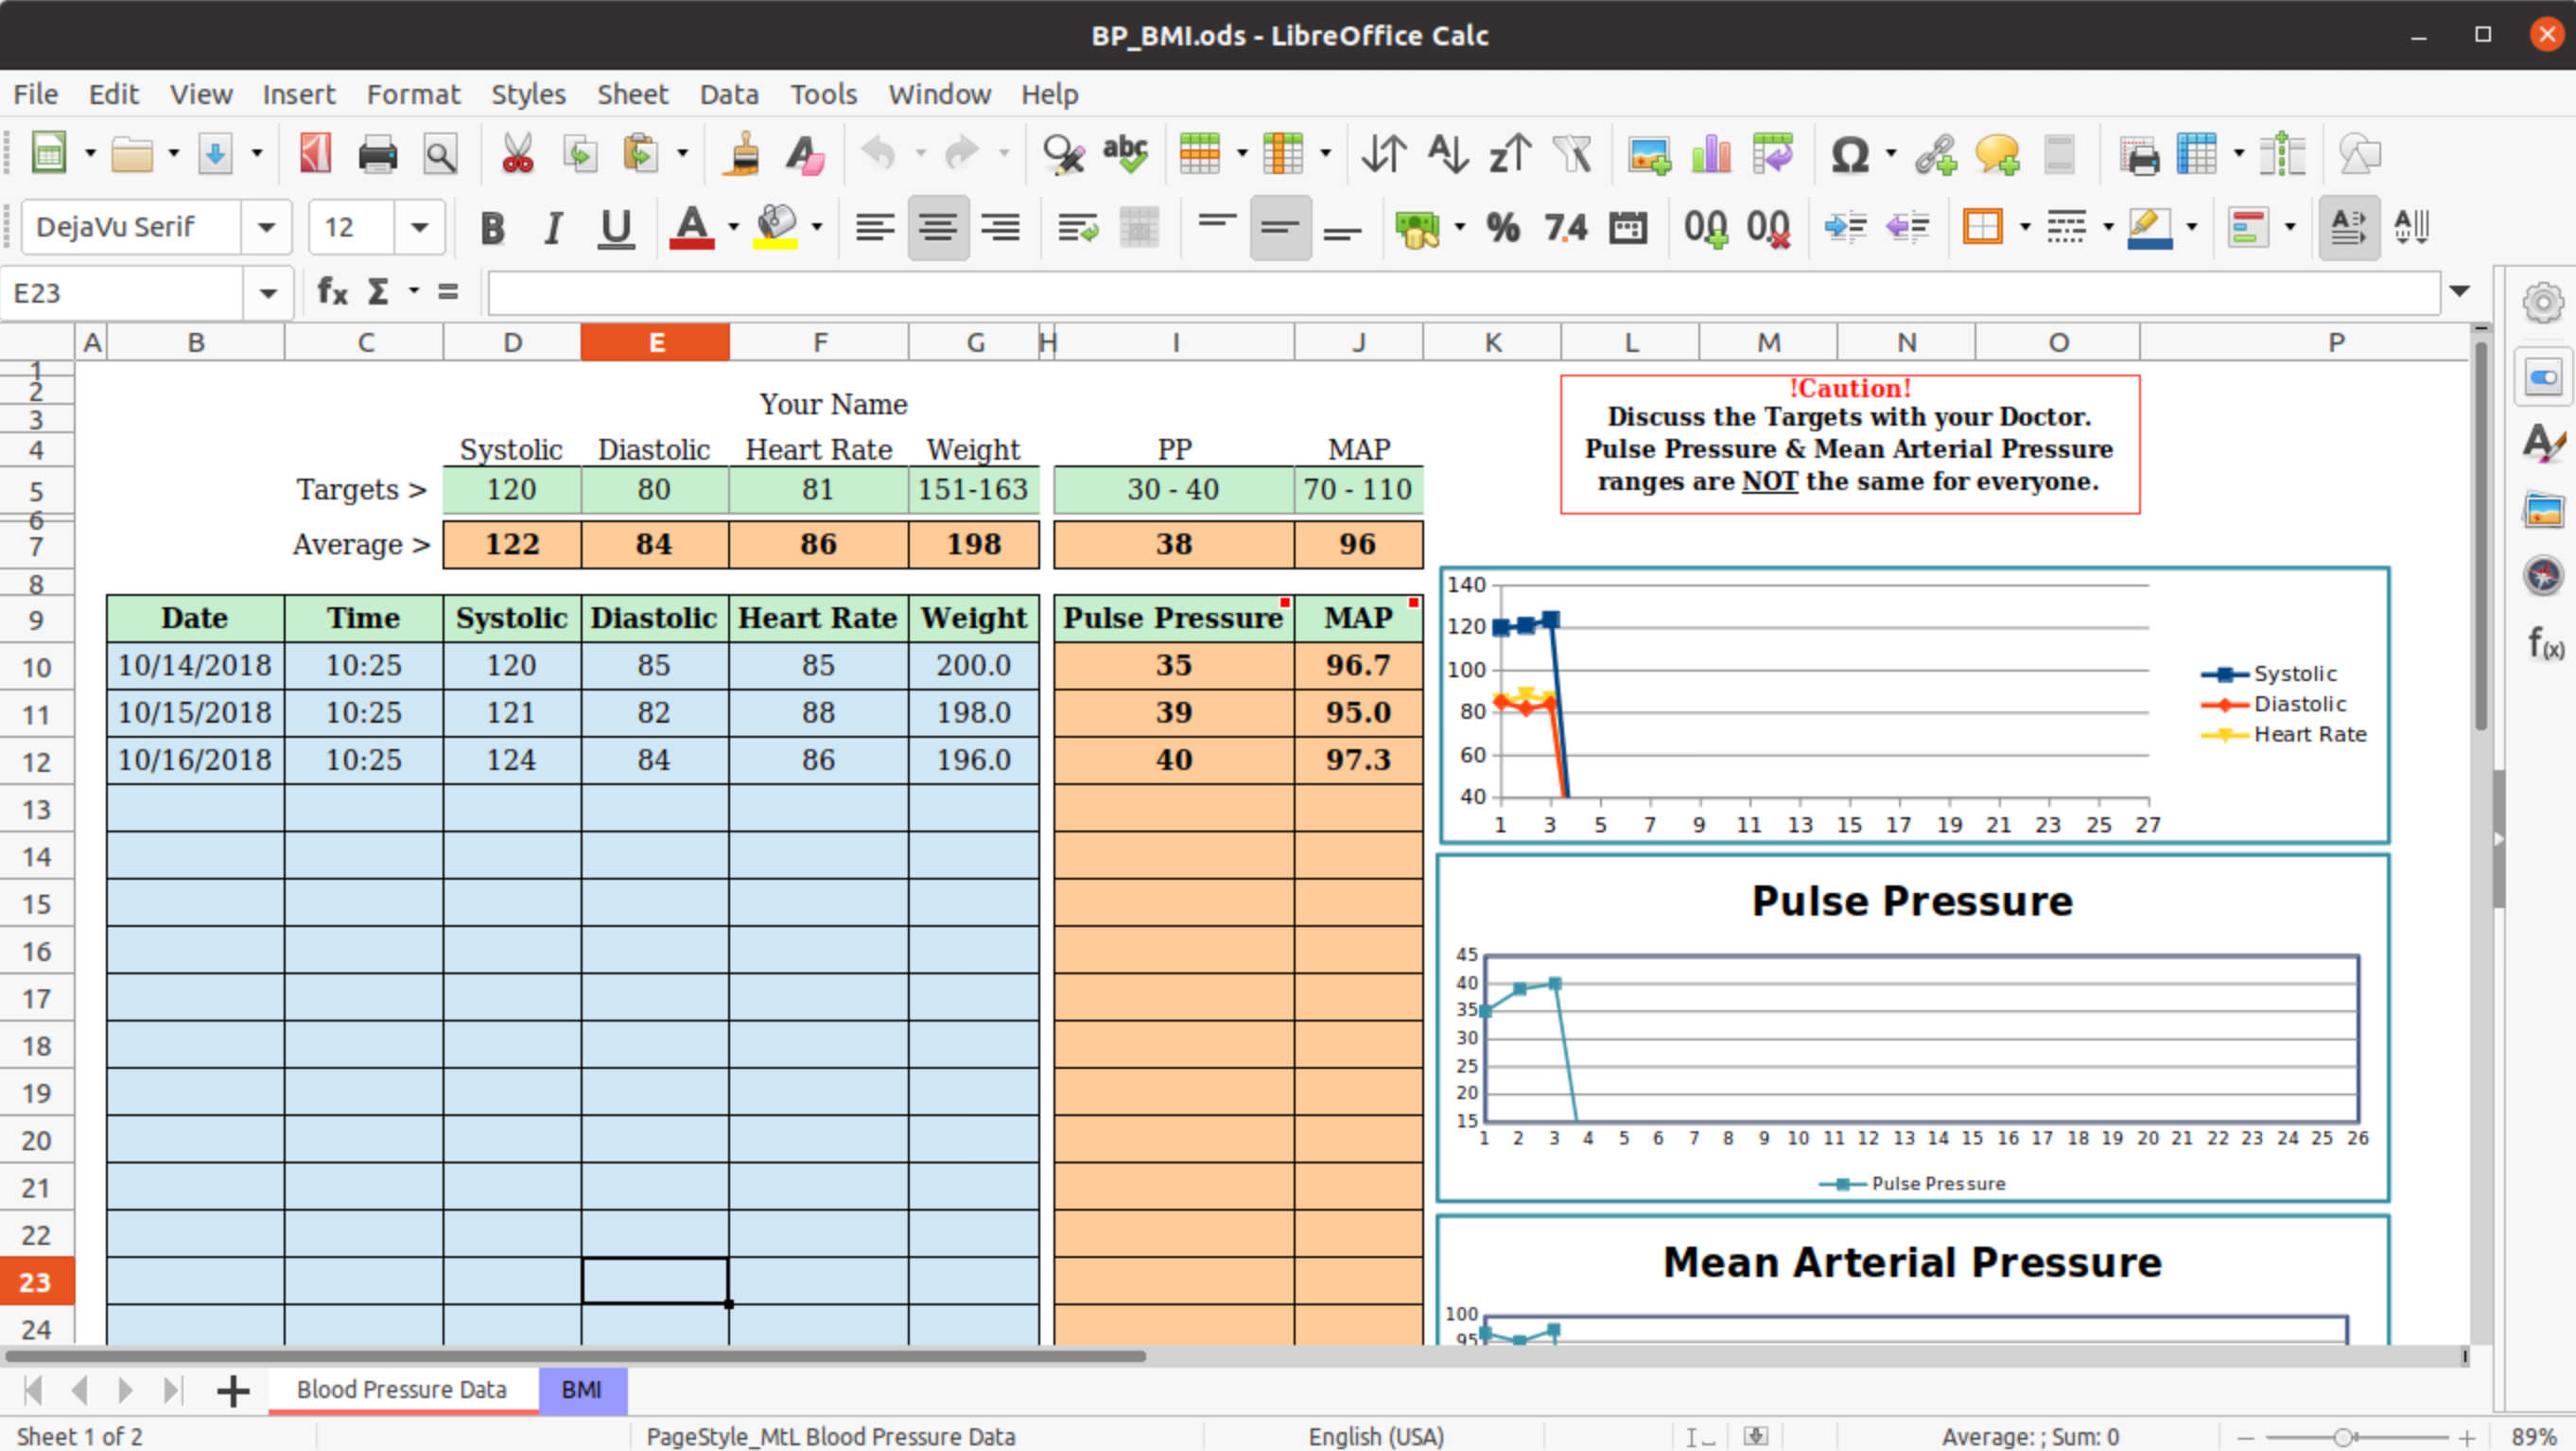 Image of LibreOffice Calc Interface